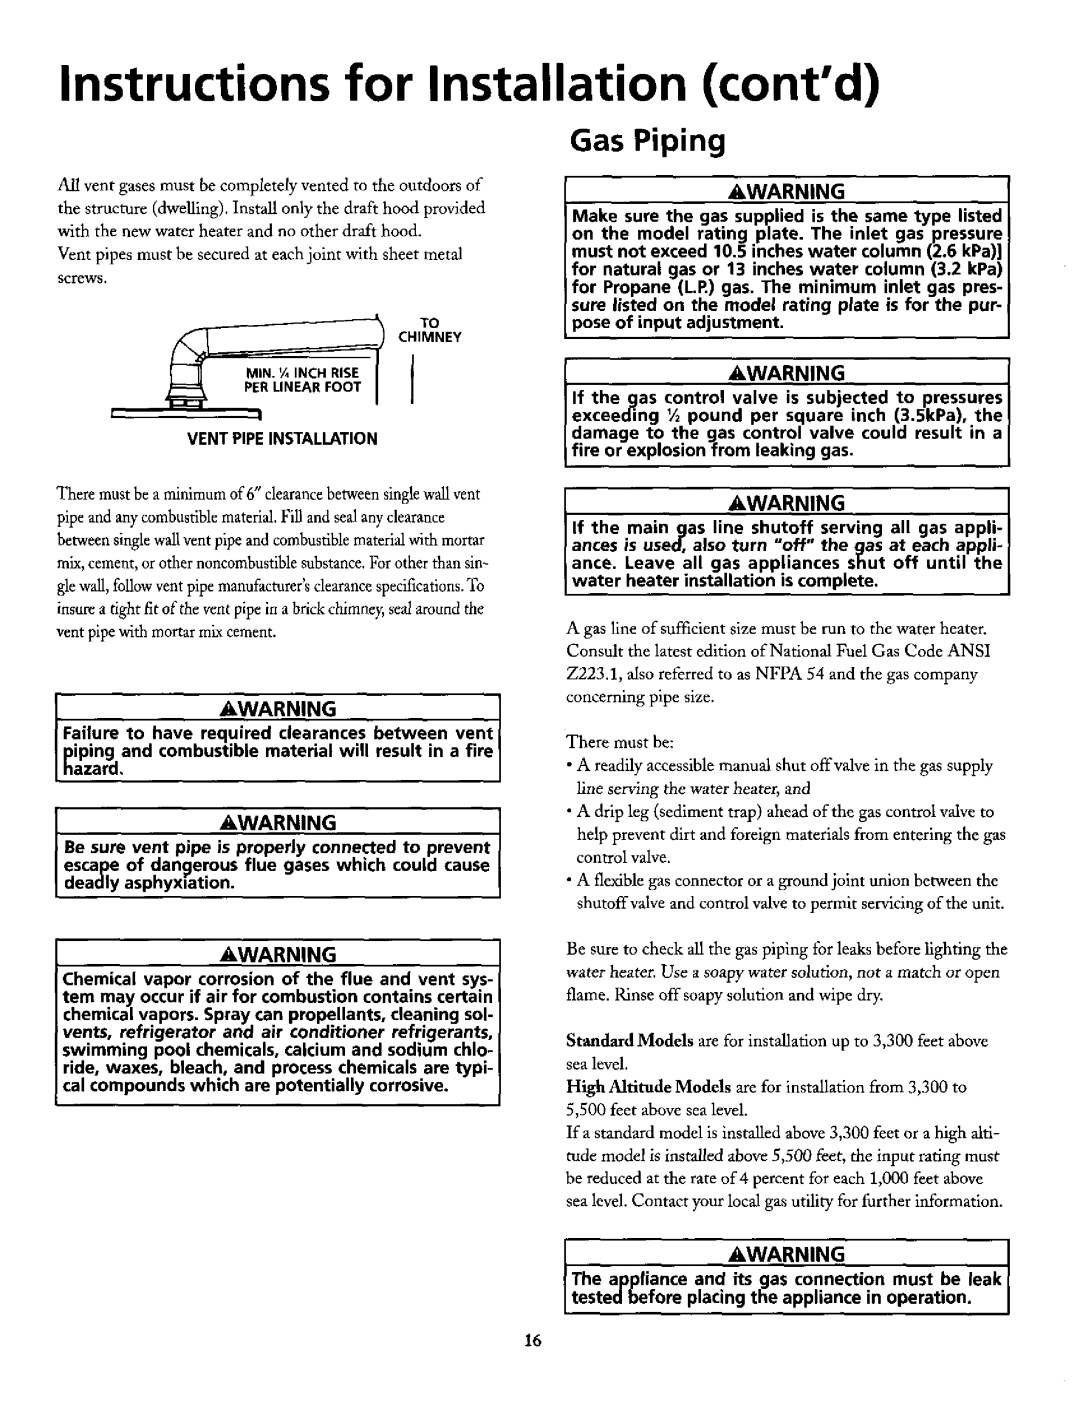 Maytag HN51240X Gas Piping, Instructions for Installation contd, Make sure the gas supplied is the, same, type listed 